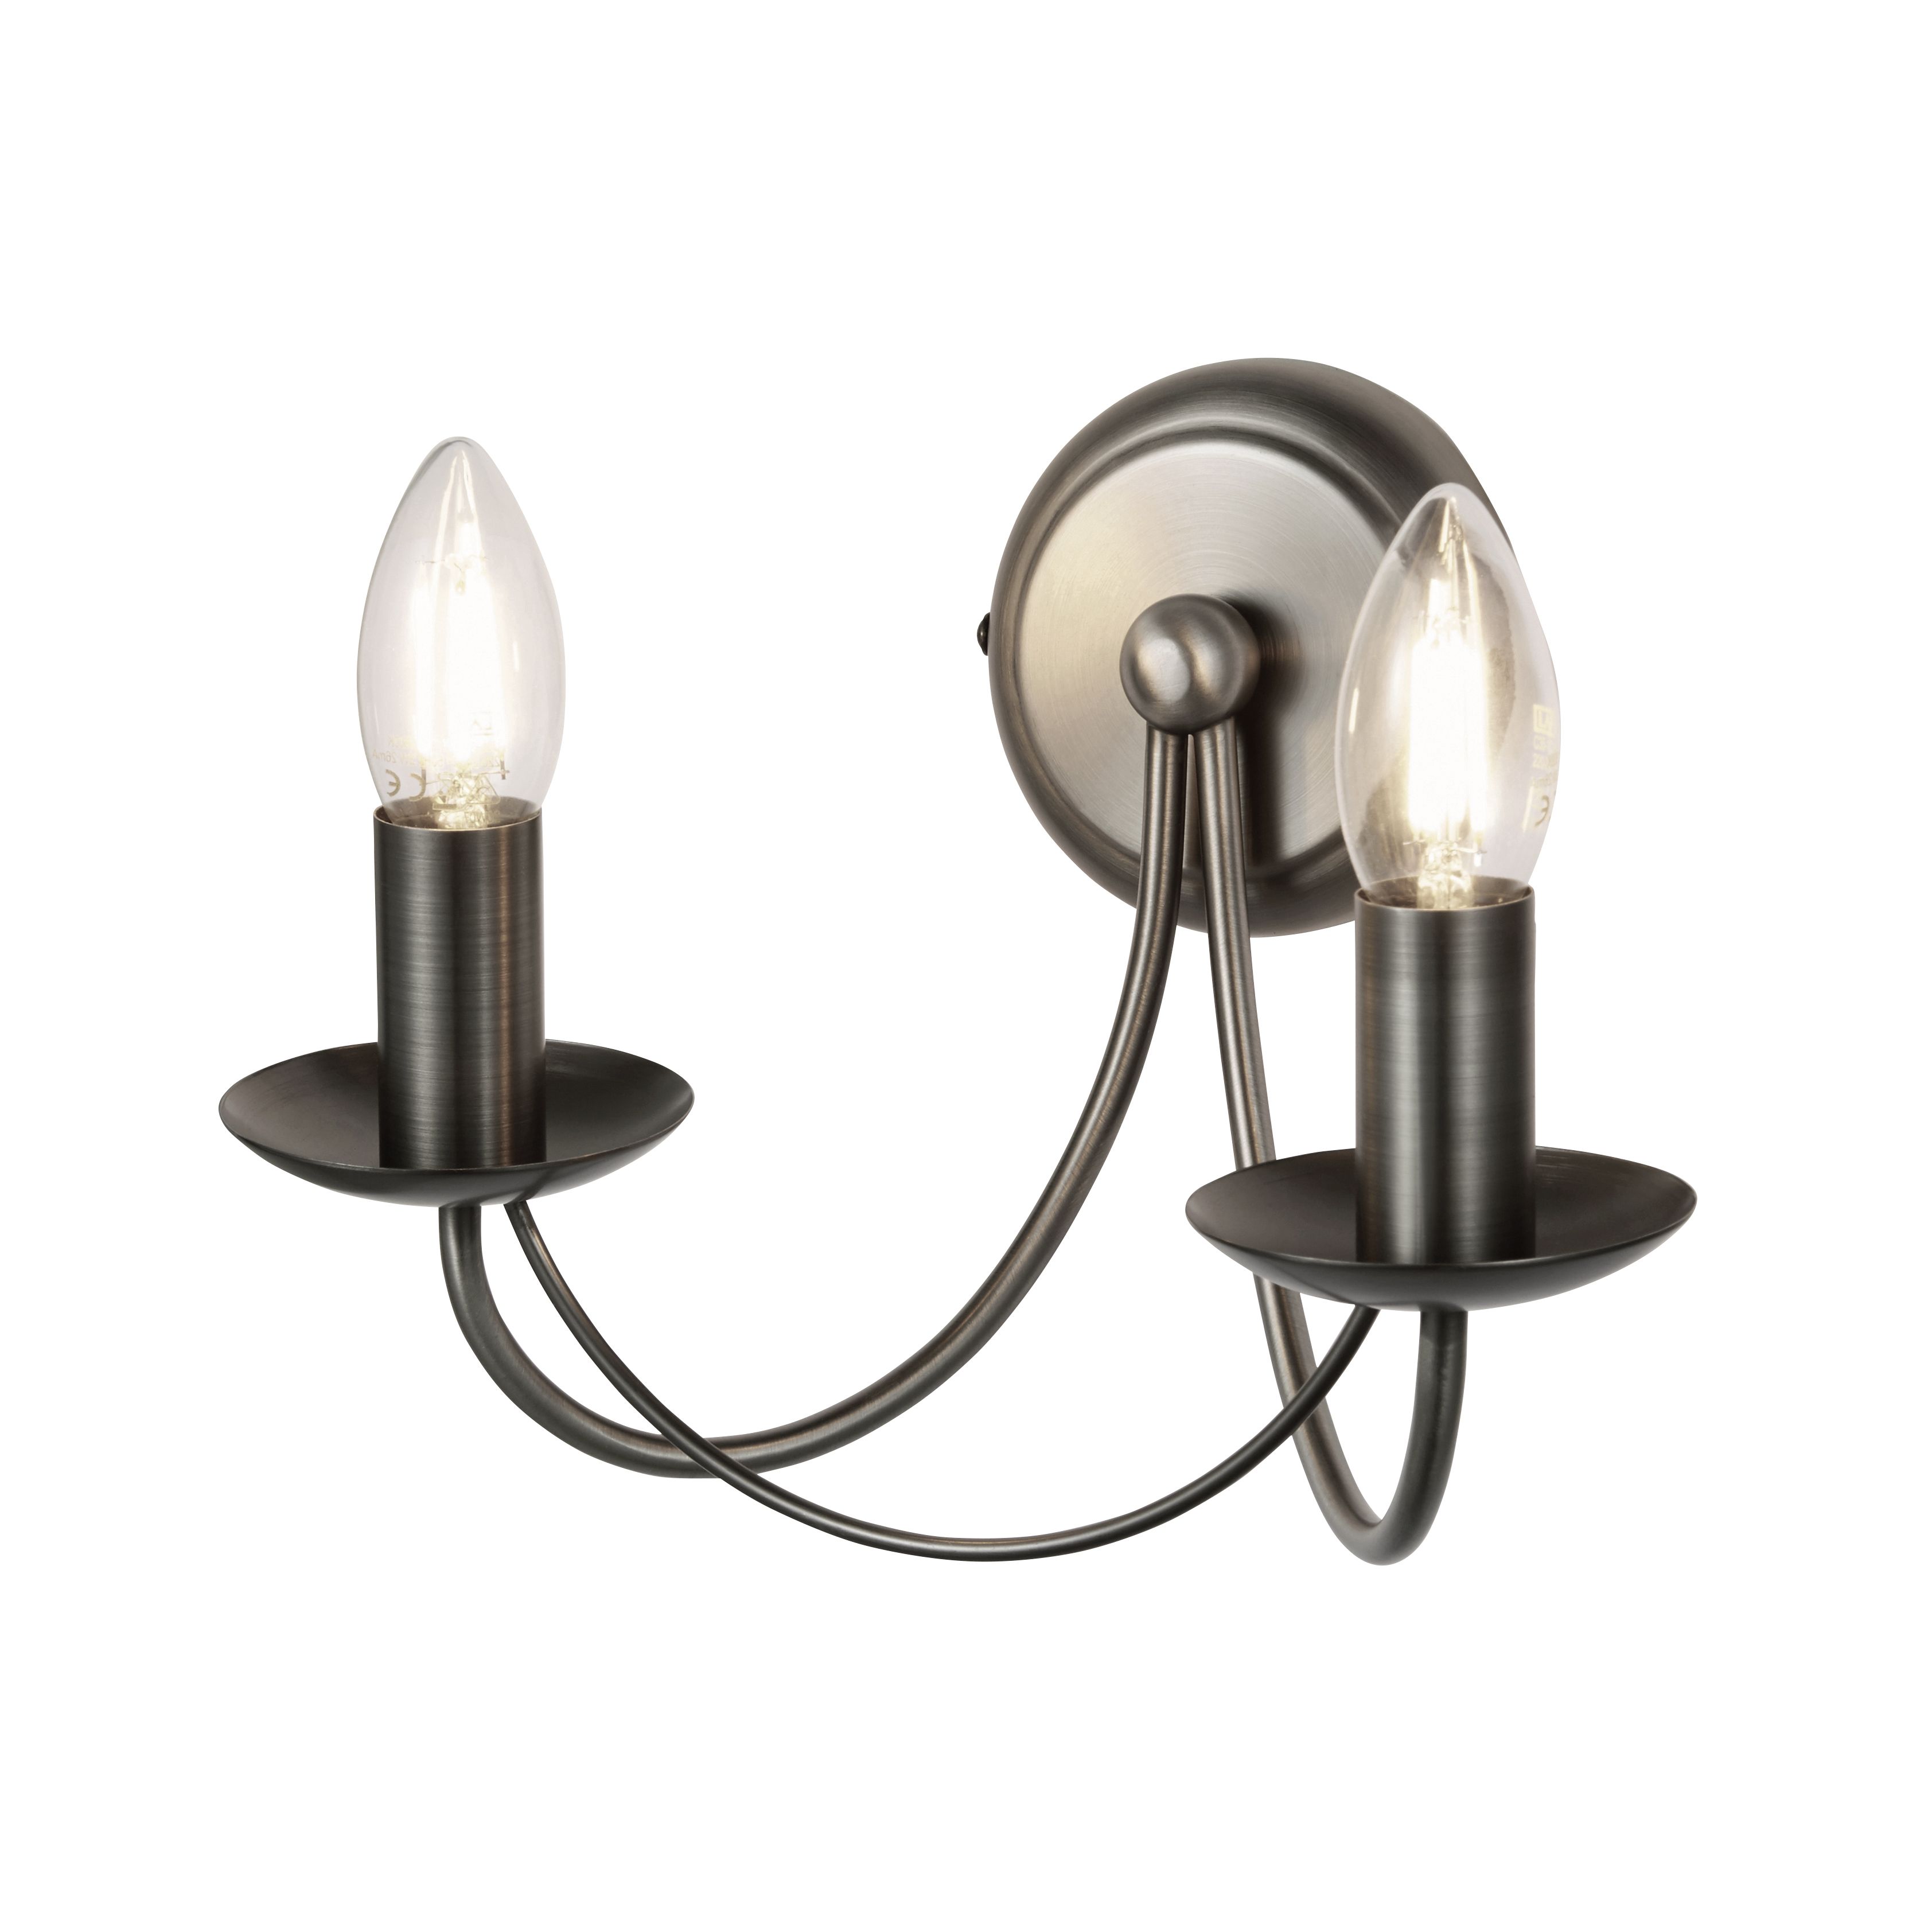 Inlight Freesia Pewter effect Wired Wall light BQ-36243-PEW